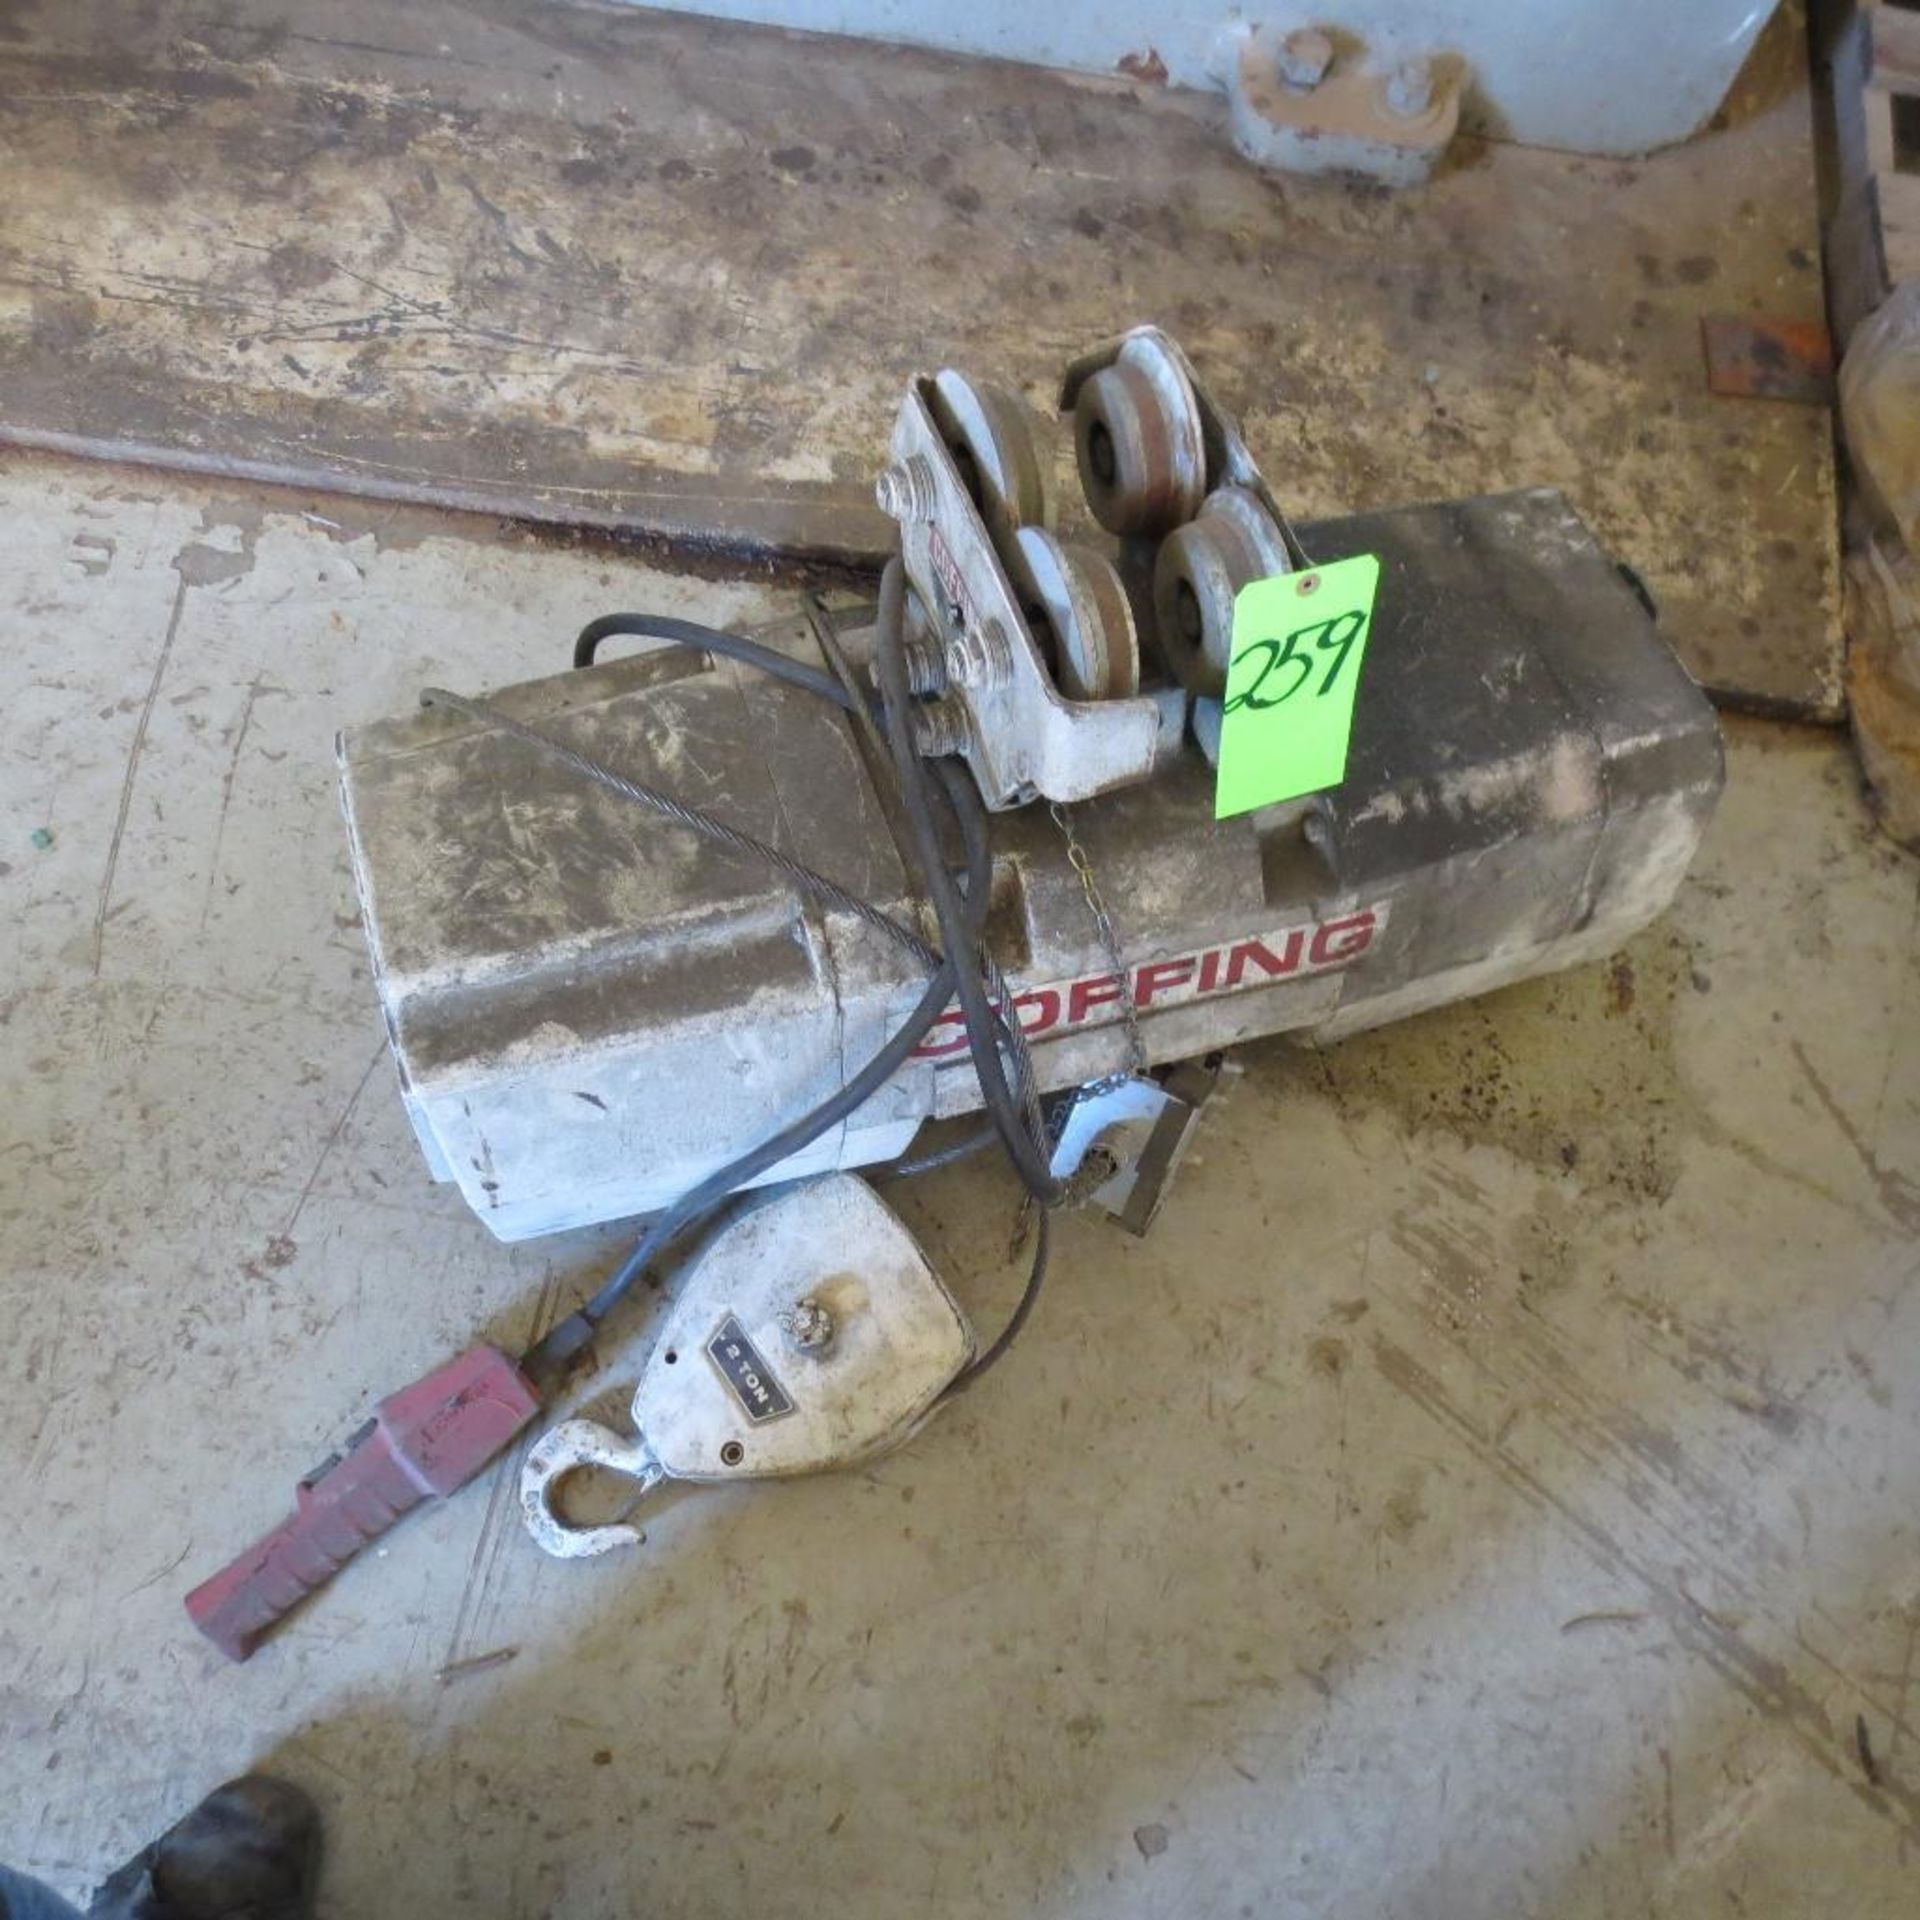 2 Ton Electric Hoist ( Need Repaired ) ; located at 8129 South Industrial Drive Cedar Hill, MO 63016